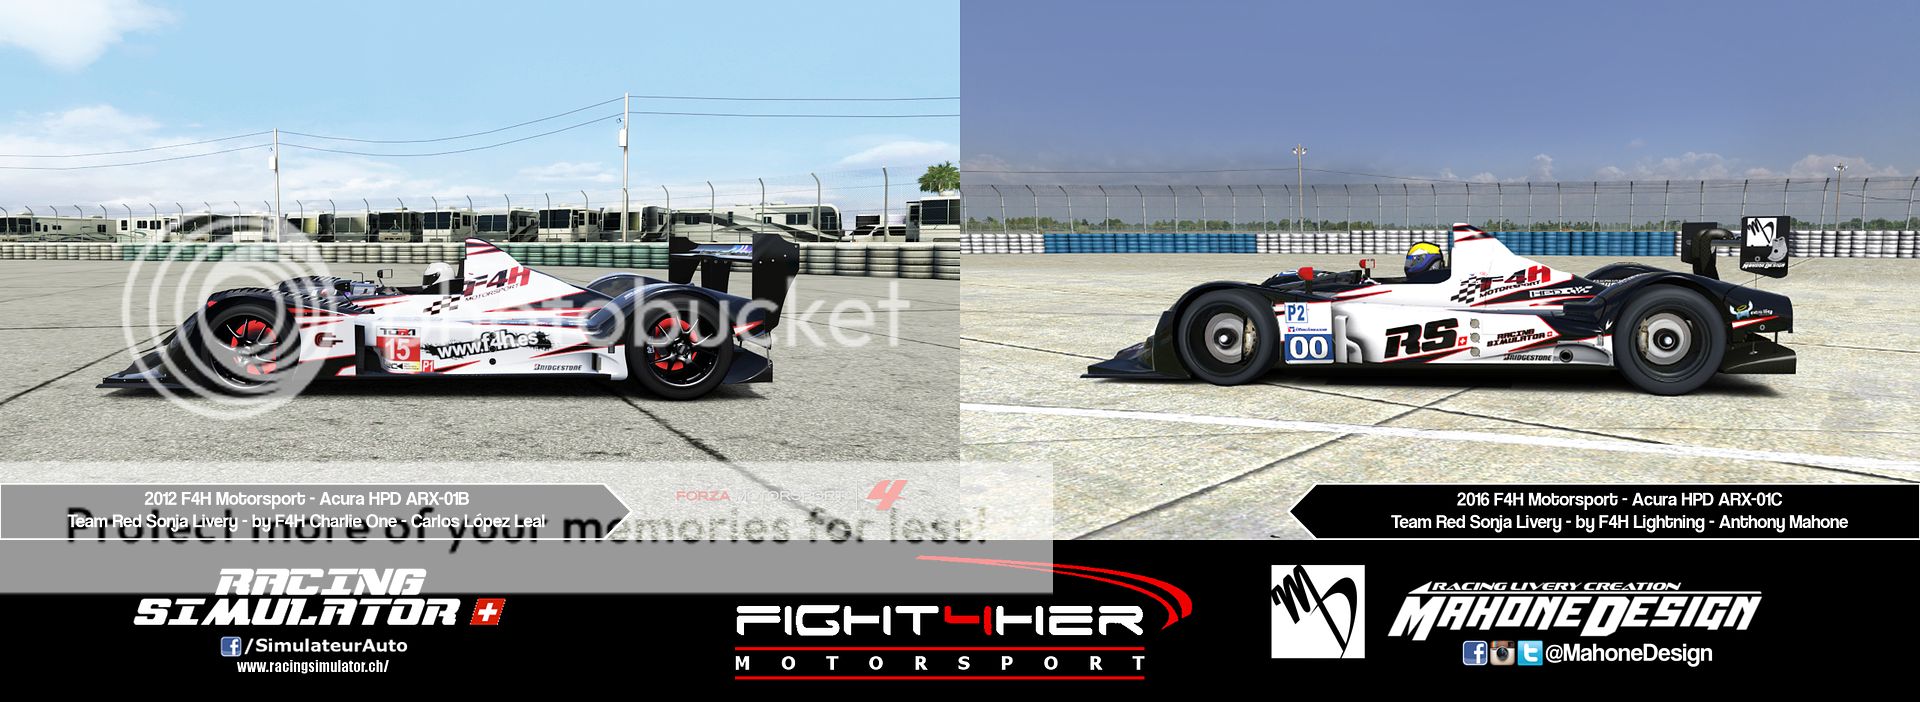 MahoneDesign - Racecar Livery Creation F4H%20Red%20Sonja%20Left%20Side